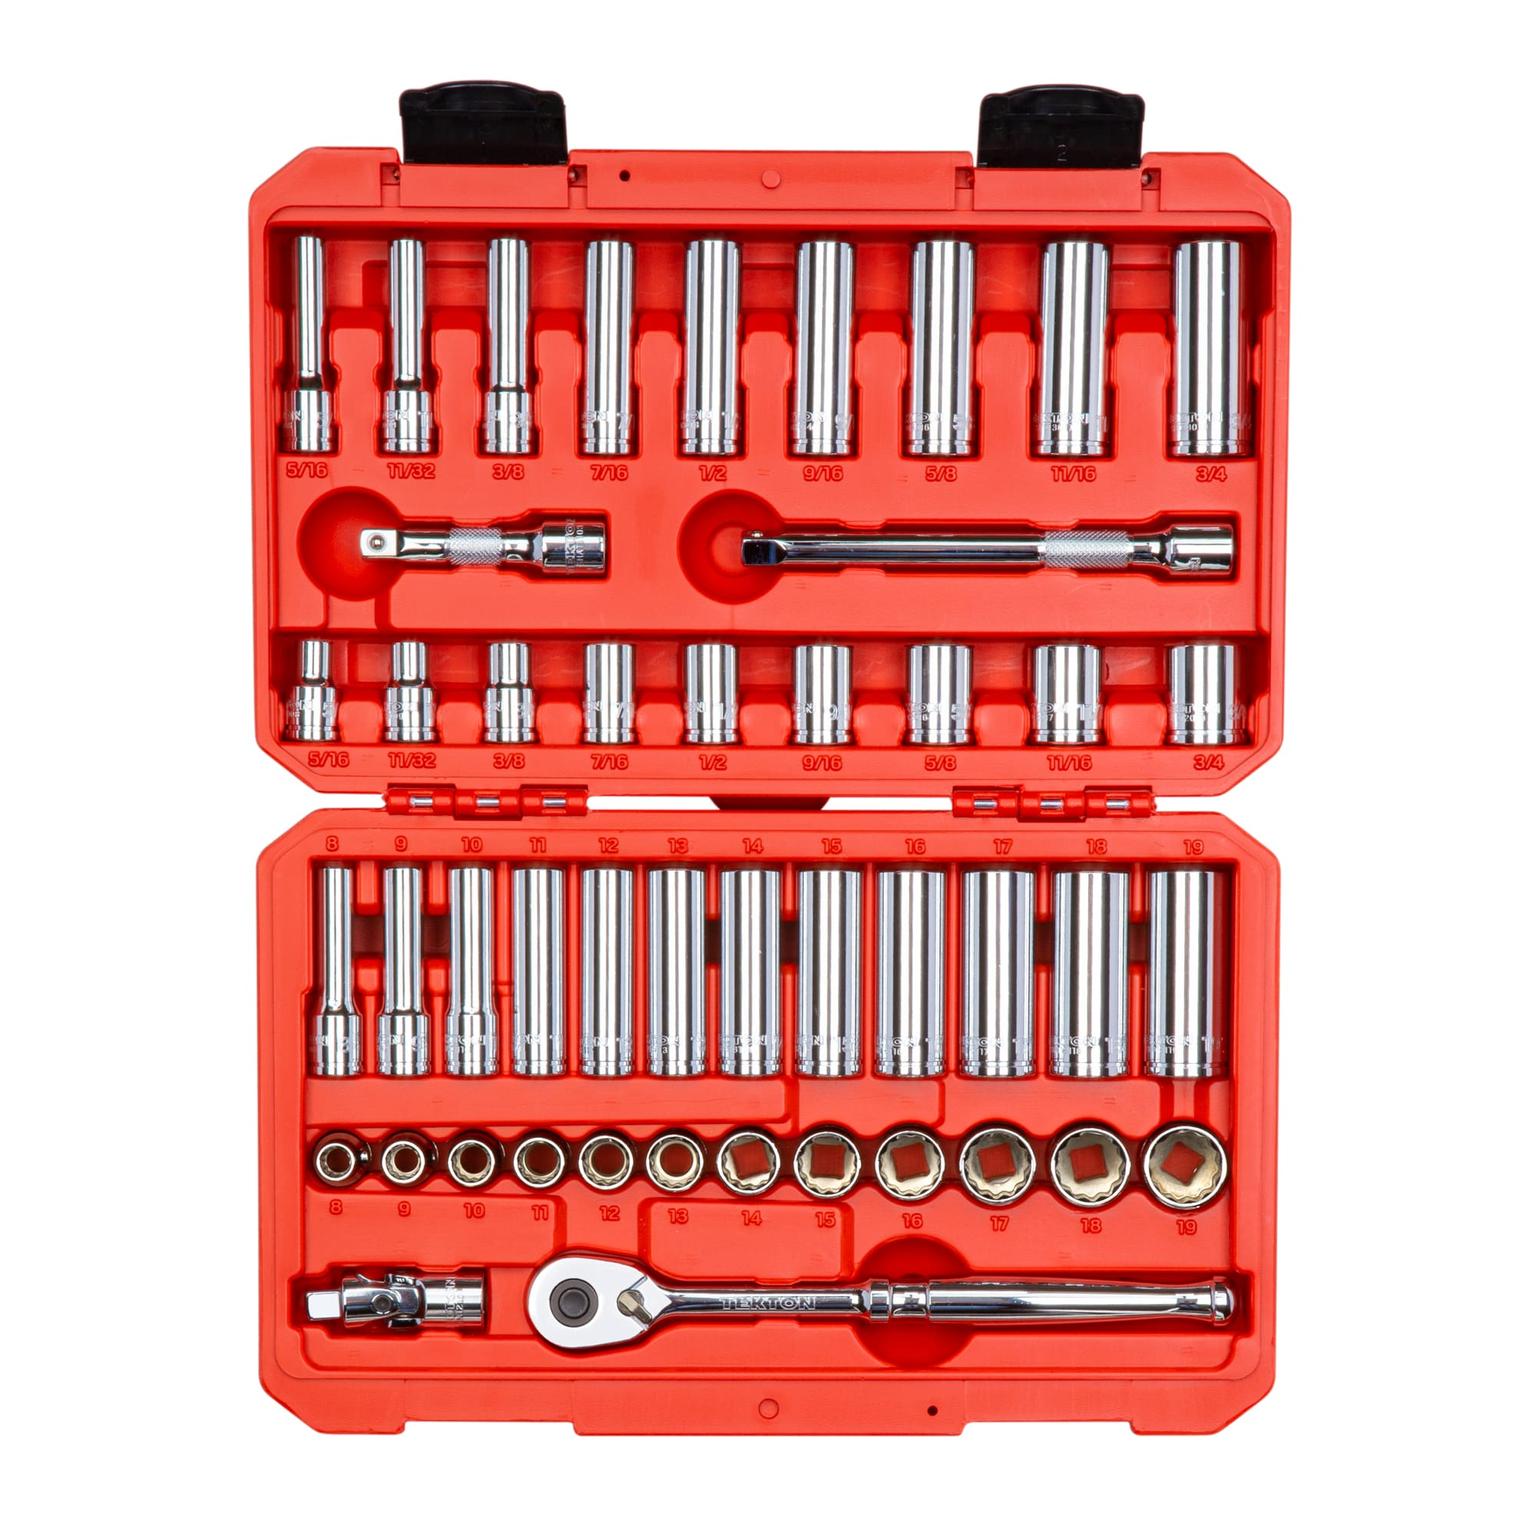 TEKTON SKT15302-D 3/8 Inch Drive 12-Point Socket and Ratchet Set, 46-Piece (5/16-3/4 in., 8-19 mm)